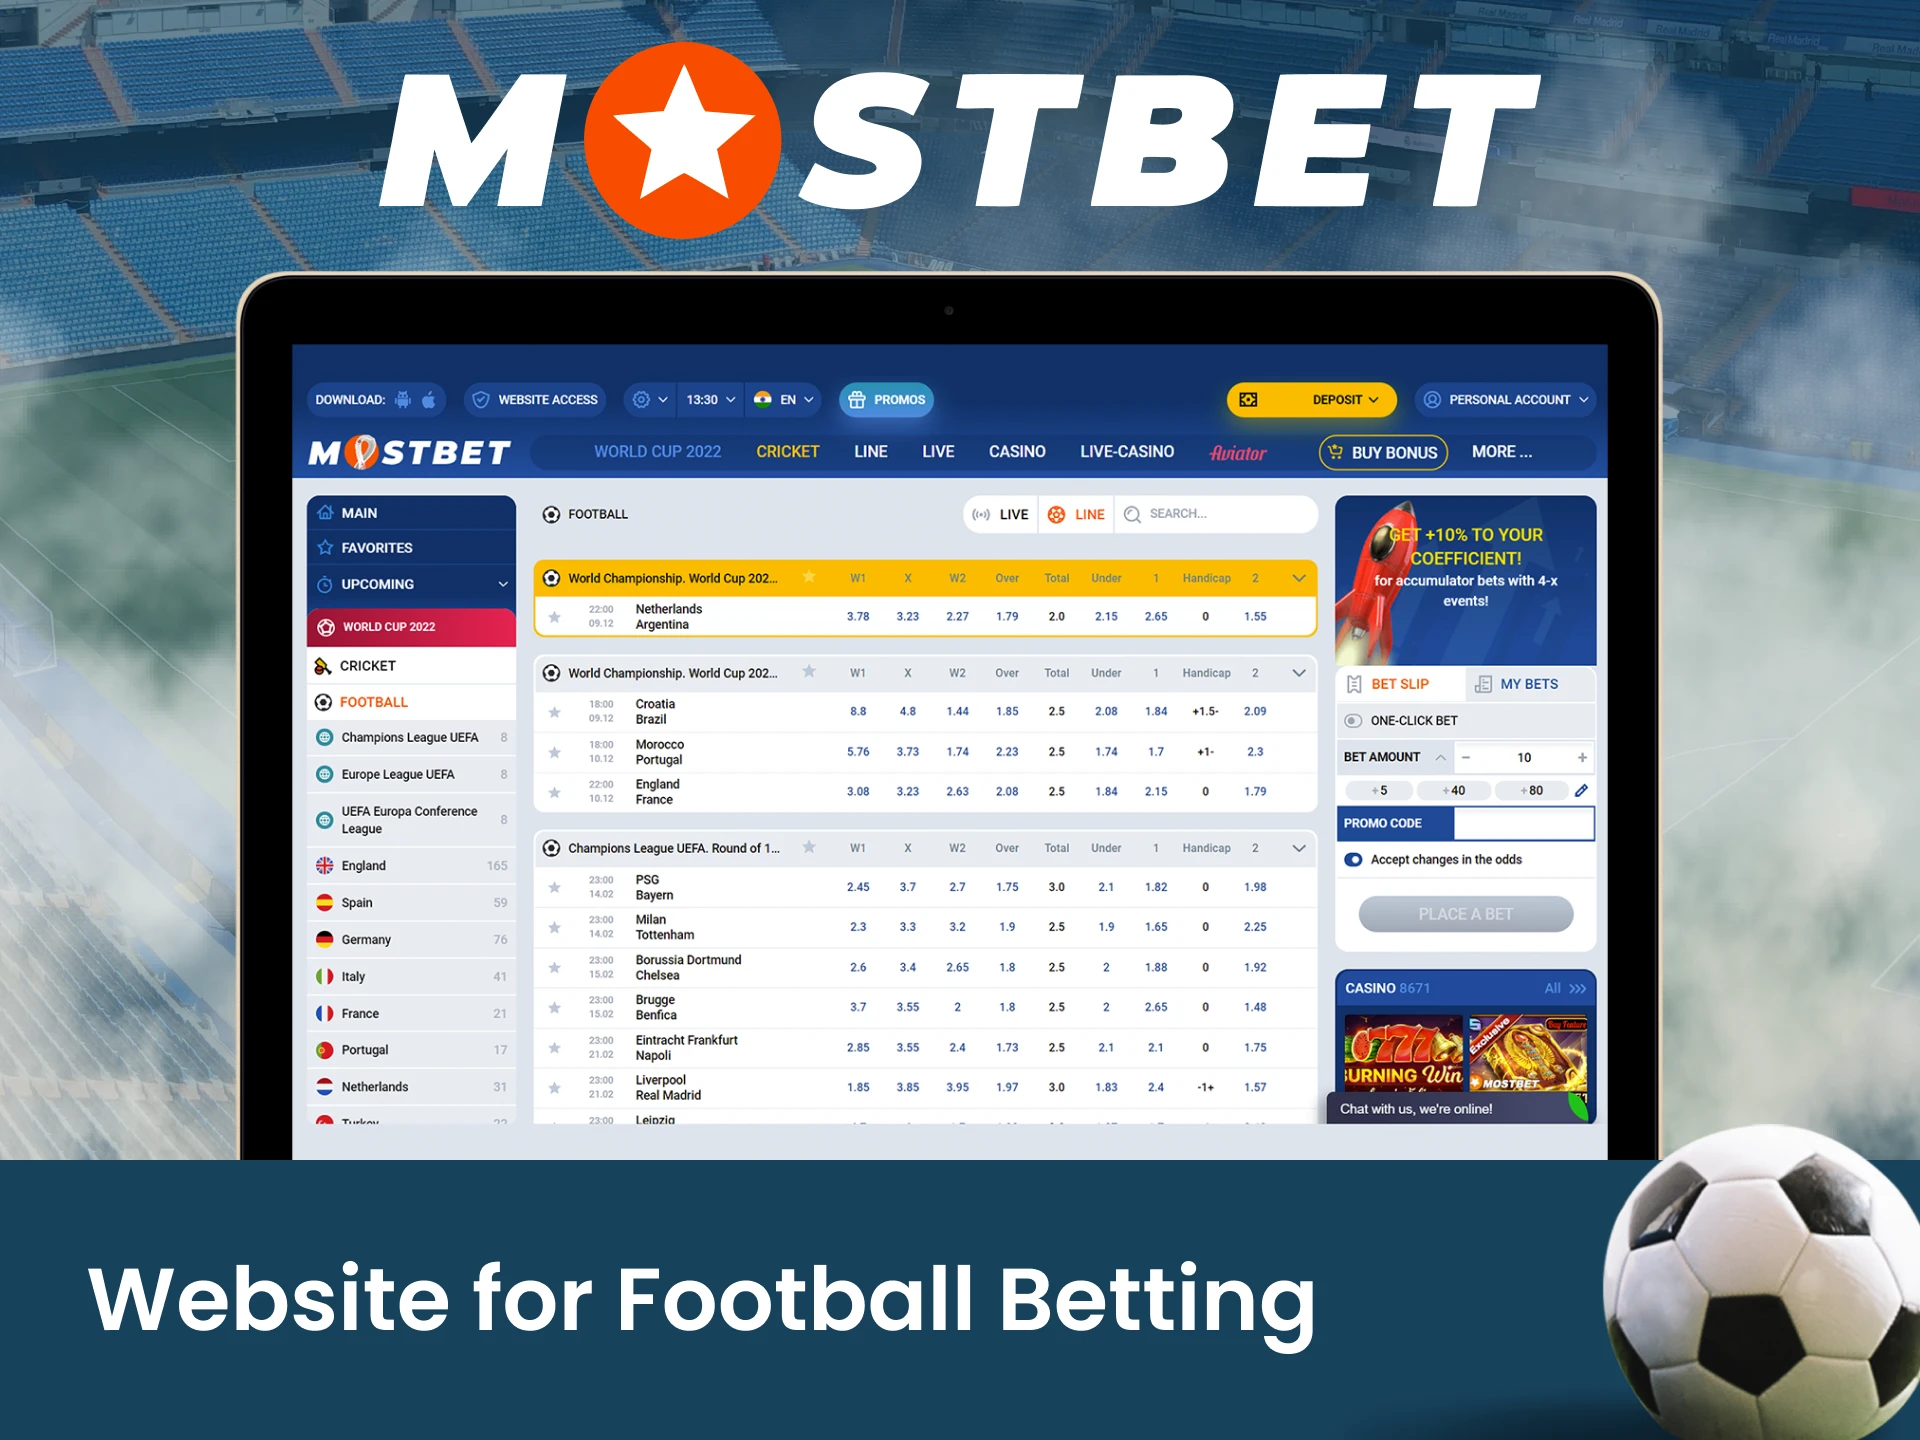 The Best Online Football Betting Sites in India 2023